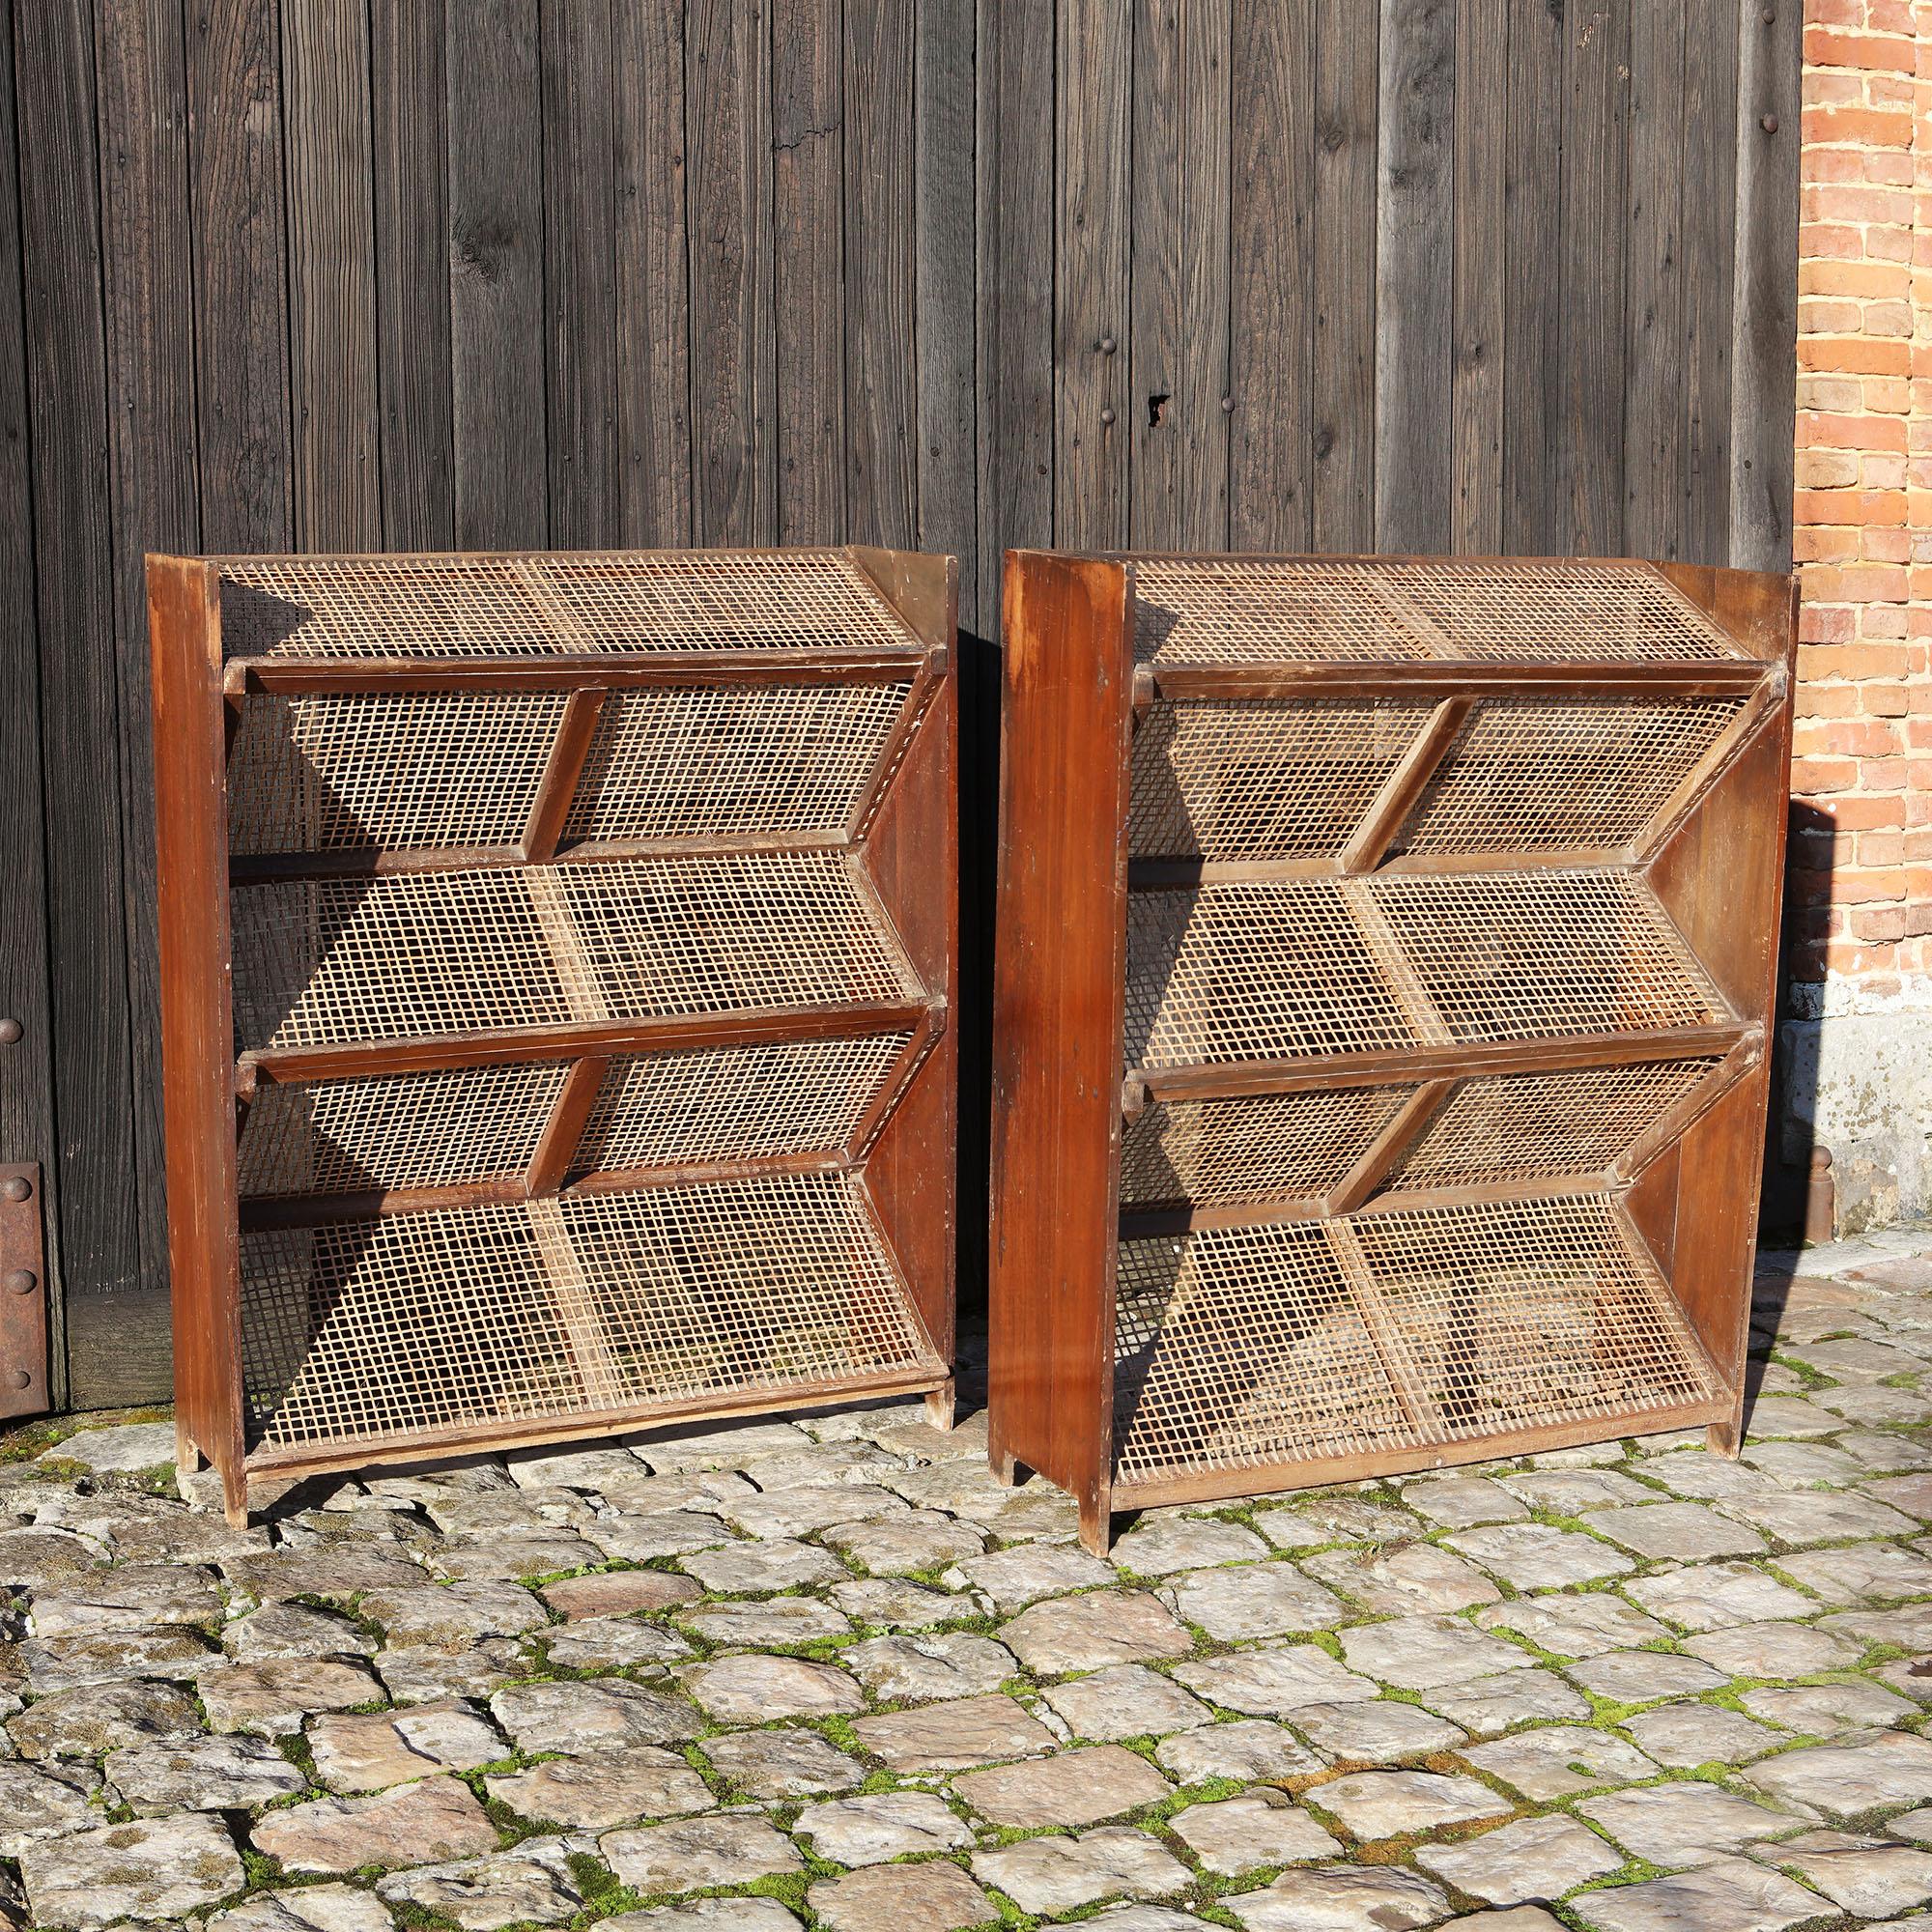 20th Century Pair of Teak and Cane Magazine Racks by Pierre Jeanneret for Chandigarh, India